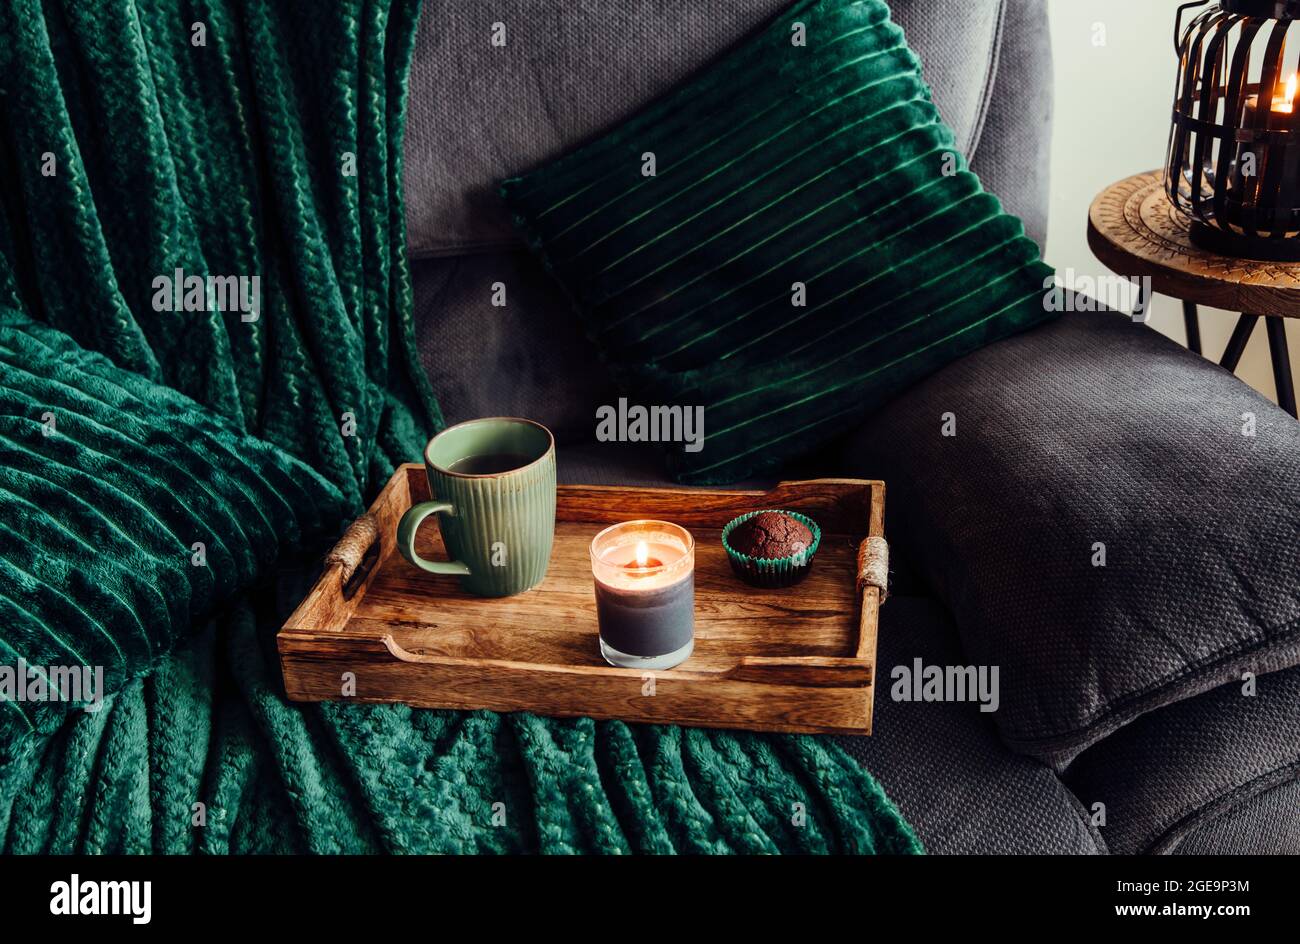 https://c8.alamy.com/comp/2GE9P3M/modern-autumn-hygge-set-in-living-room-dark-green-interior-elements-soft-pillows-plaid-on-sofa-with-chocolate-muffin-aroma-drink-mug-on-wood-tray-2GE9P3M.jpg